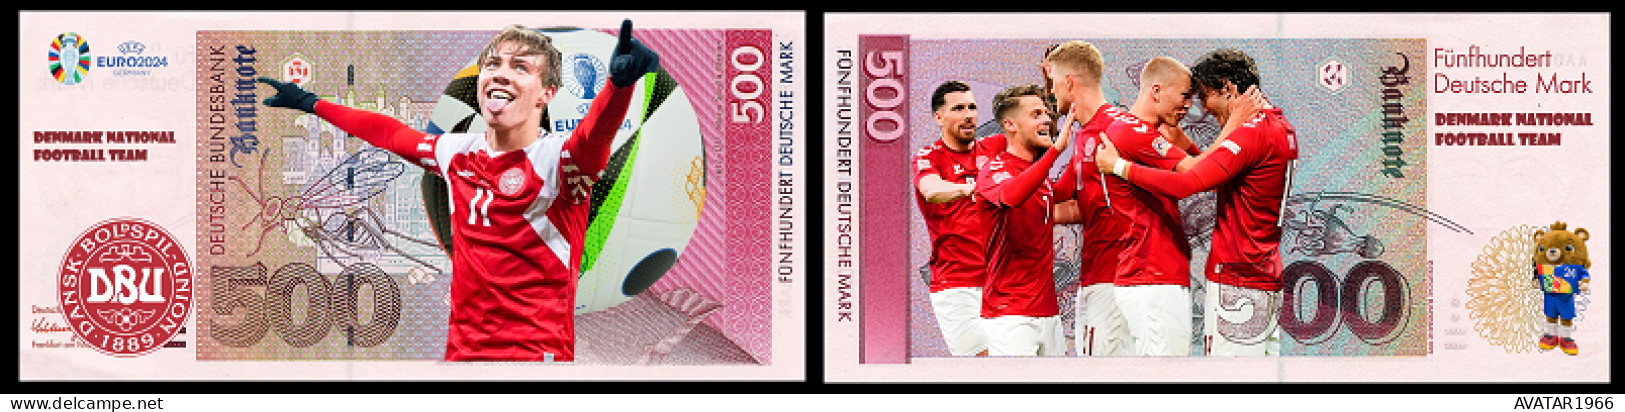 UEFA European Football Championship 2024 qualified country  Denmark 8 pieces Germany fantasy paper money